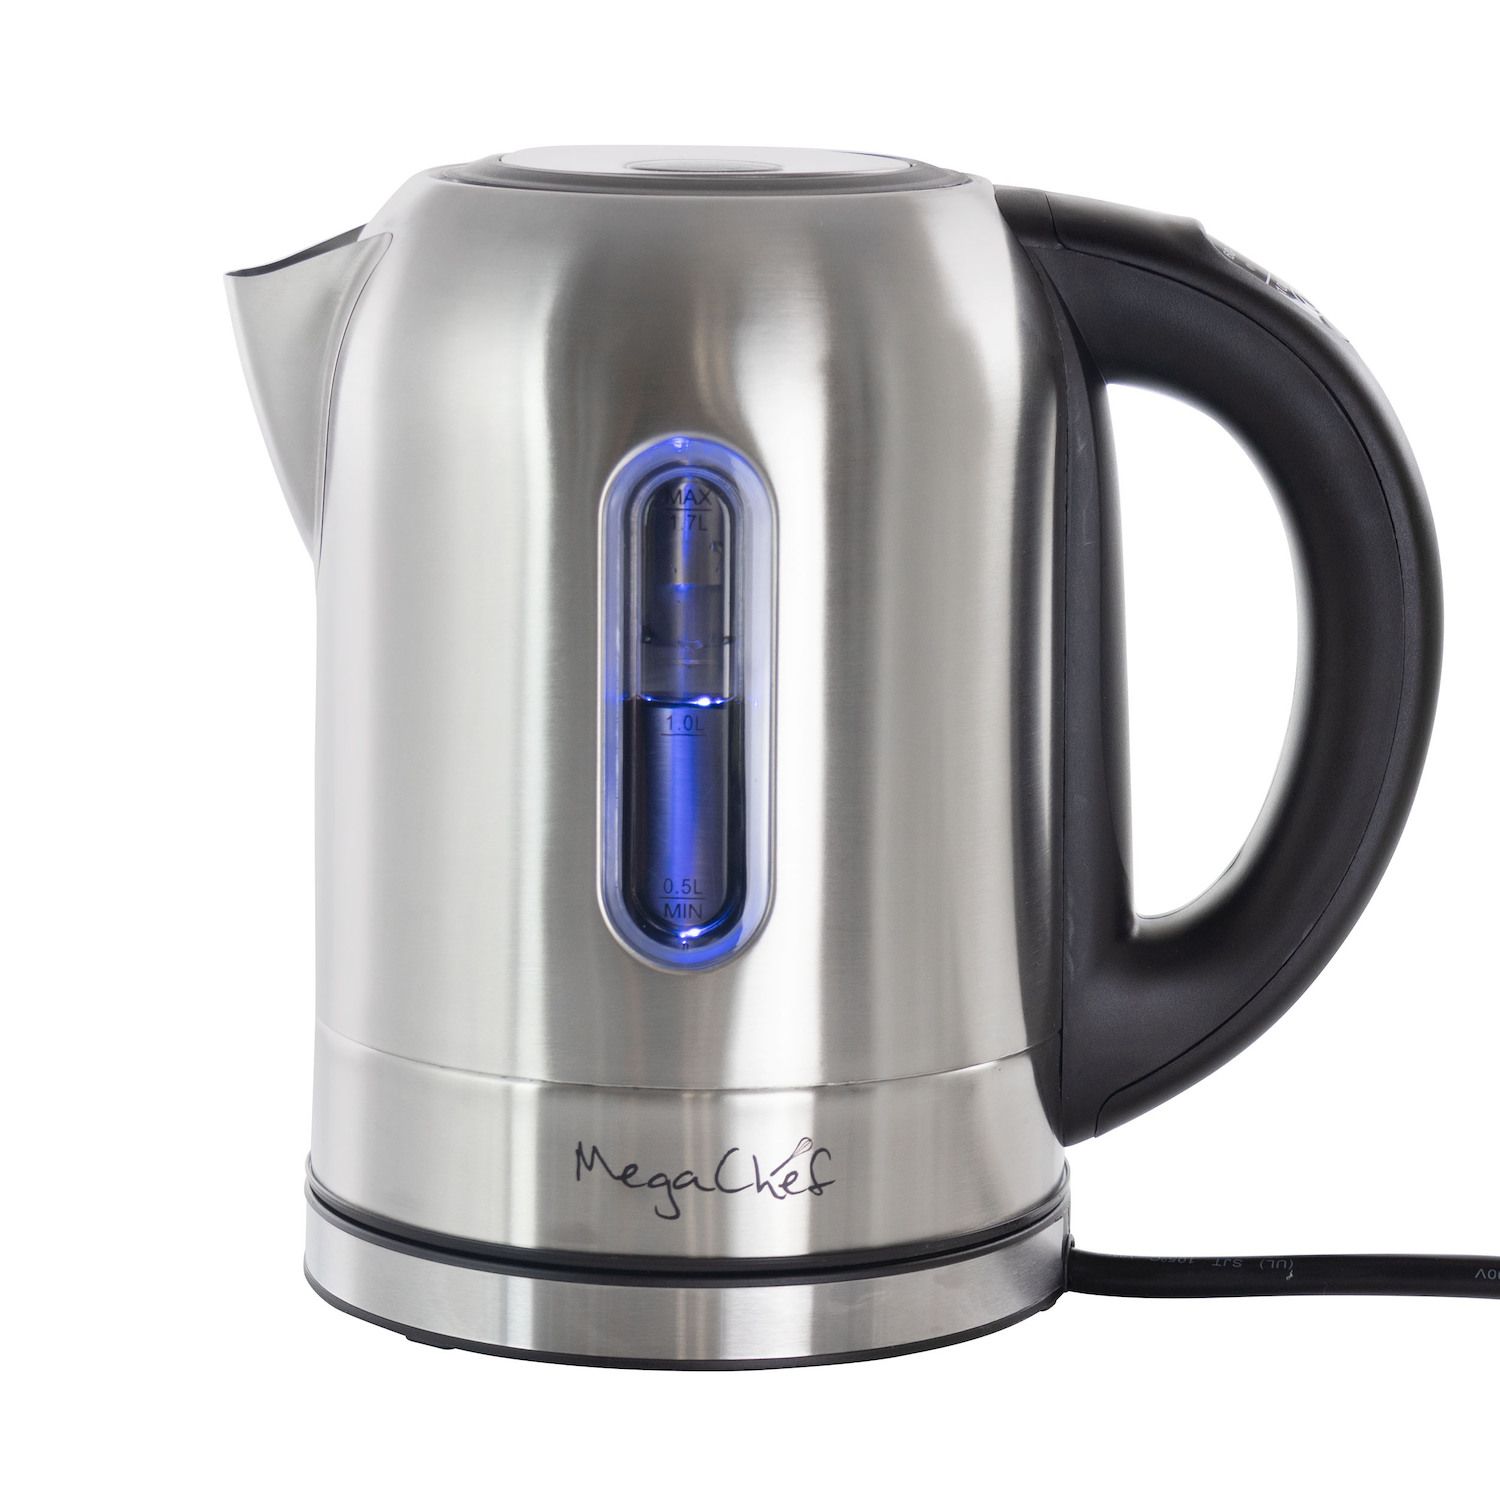 CIMERAC Ceramic Electric Kettle with Boil Dry Protection,1.7 Liter Boiling  Pot for Tea and Coffee (White)